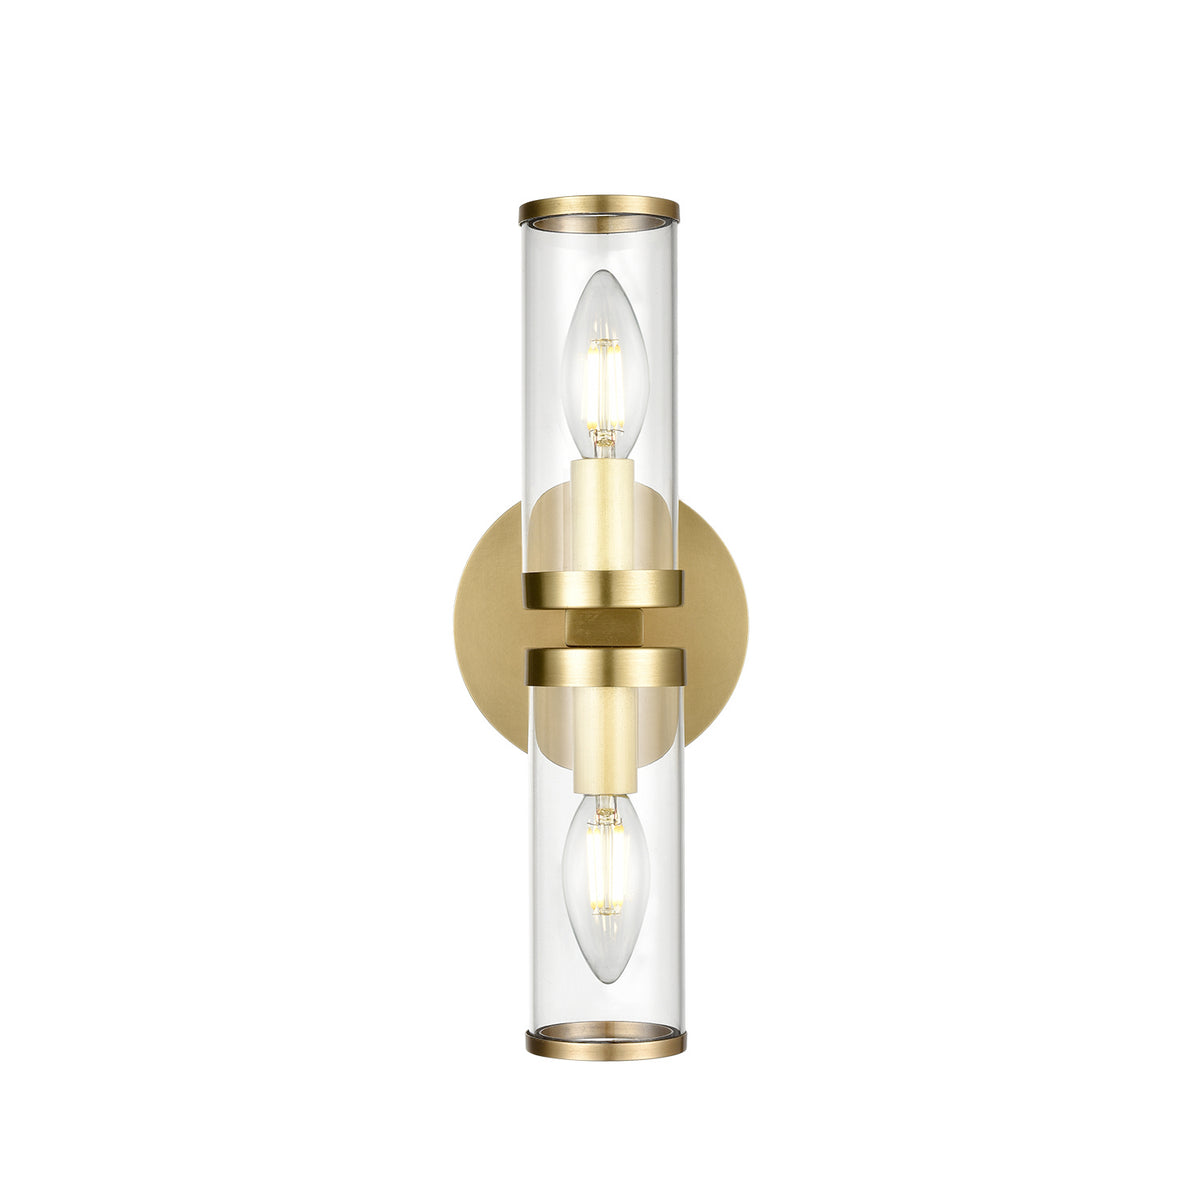 Alora Two Light Wall Sconce from the Revolve collection in Clear Glass/Natural Brass|Clear Glass/Polished Nickel|Clear Glass/Urban Bronze finish